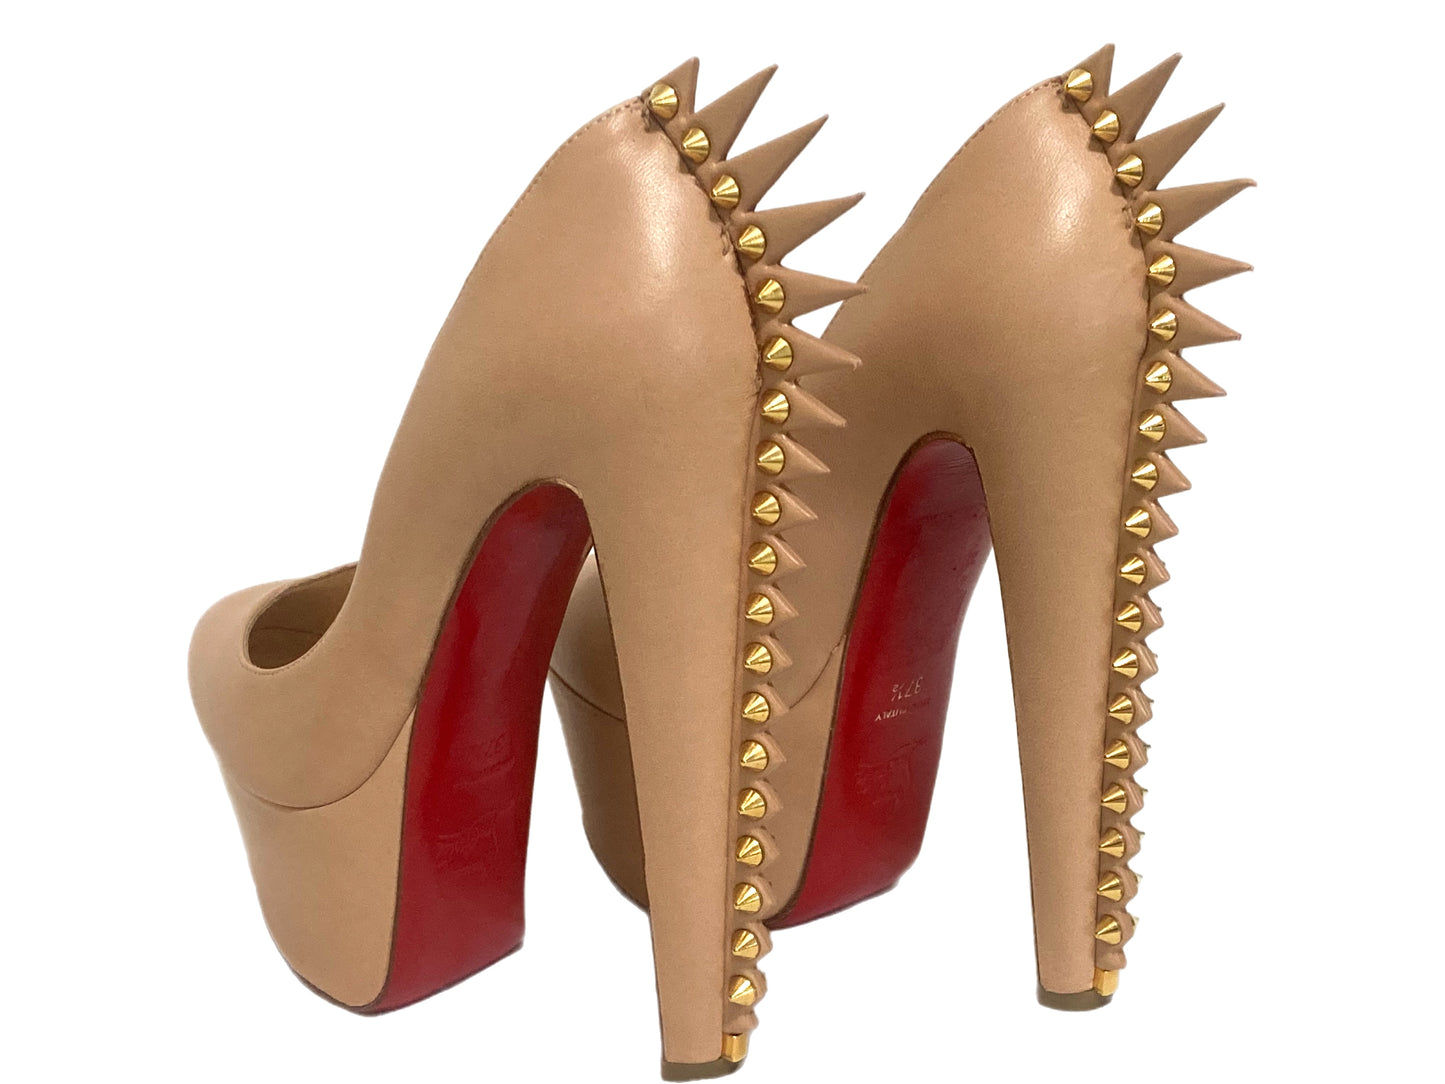 CHRISTIAN LOUBOUTIN Leather Electro Pumps Nude Size 37.5